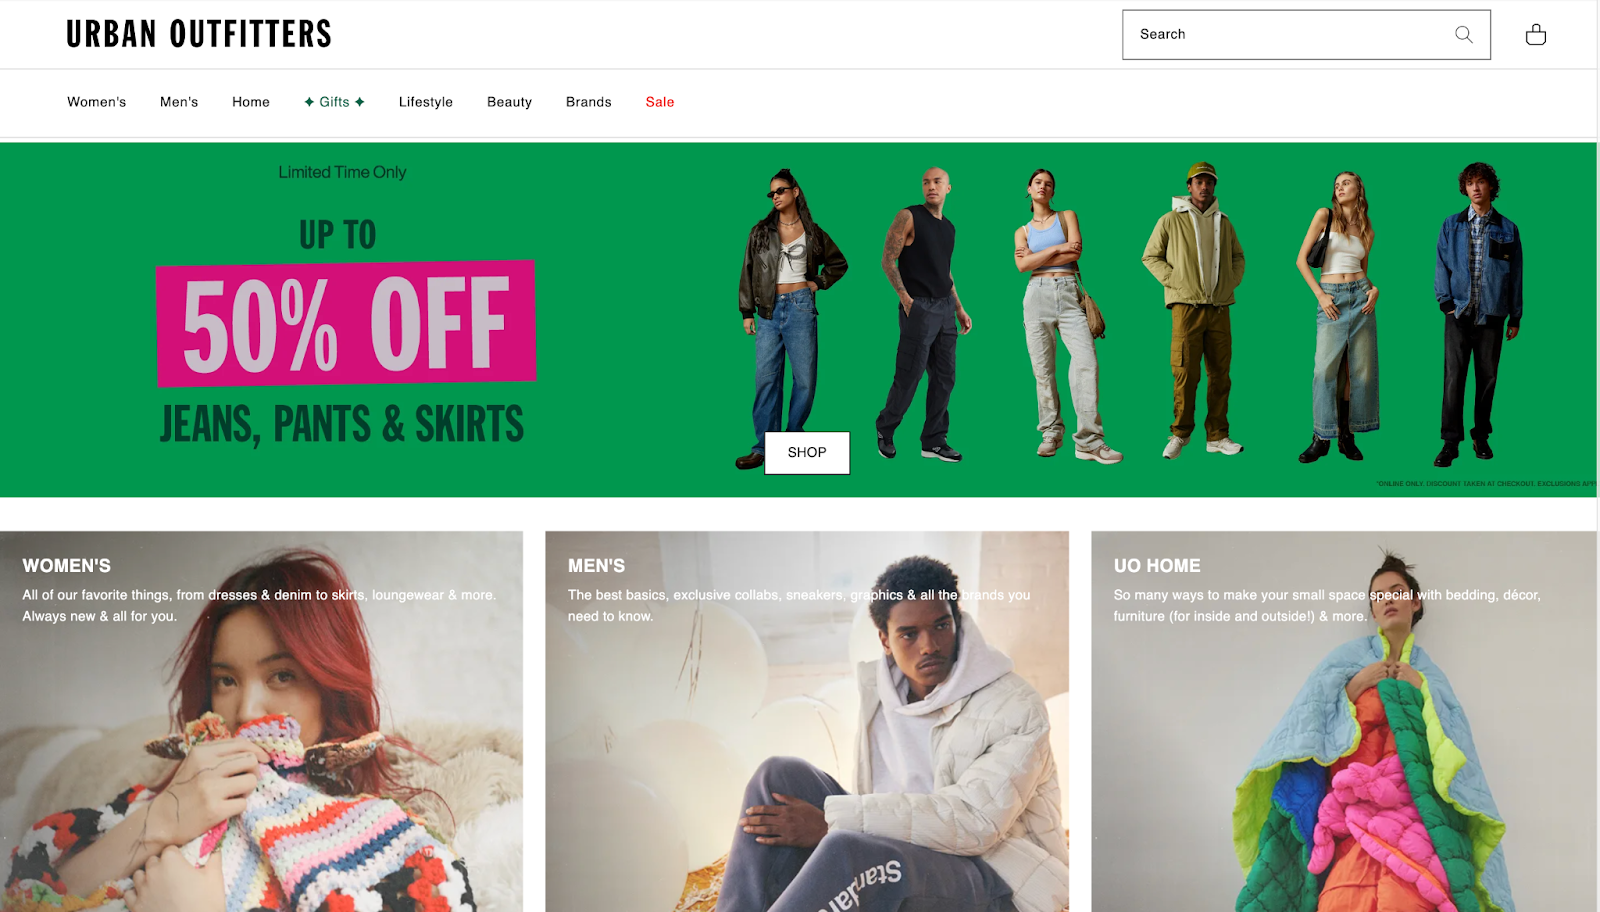 Urban Outfitters homepage